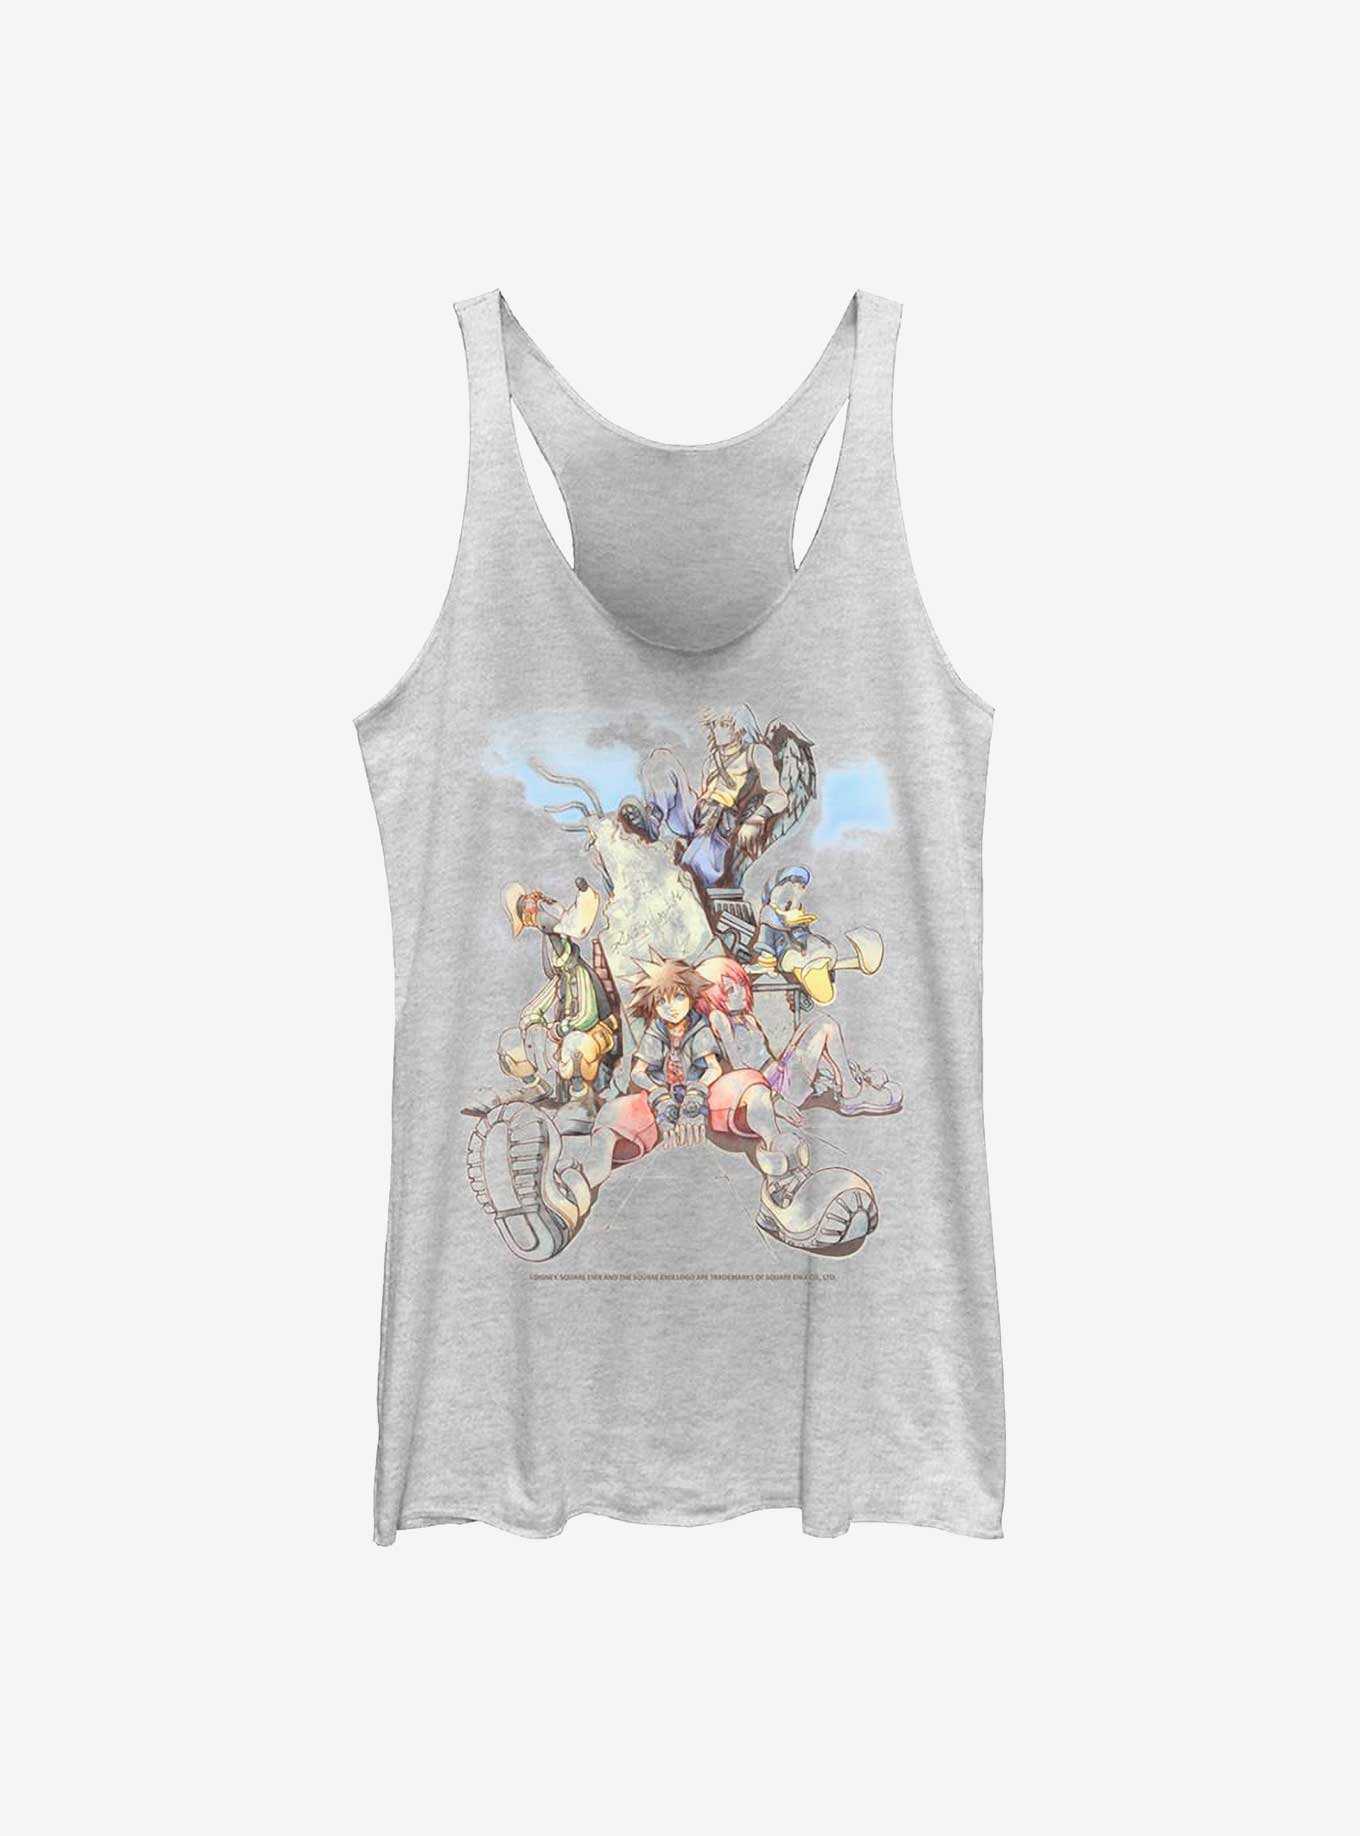 Disney Kingdom Hearts Group In The Clouds Womens Tank Top, , hi-res